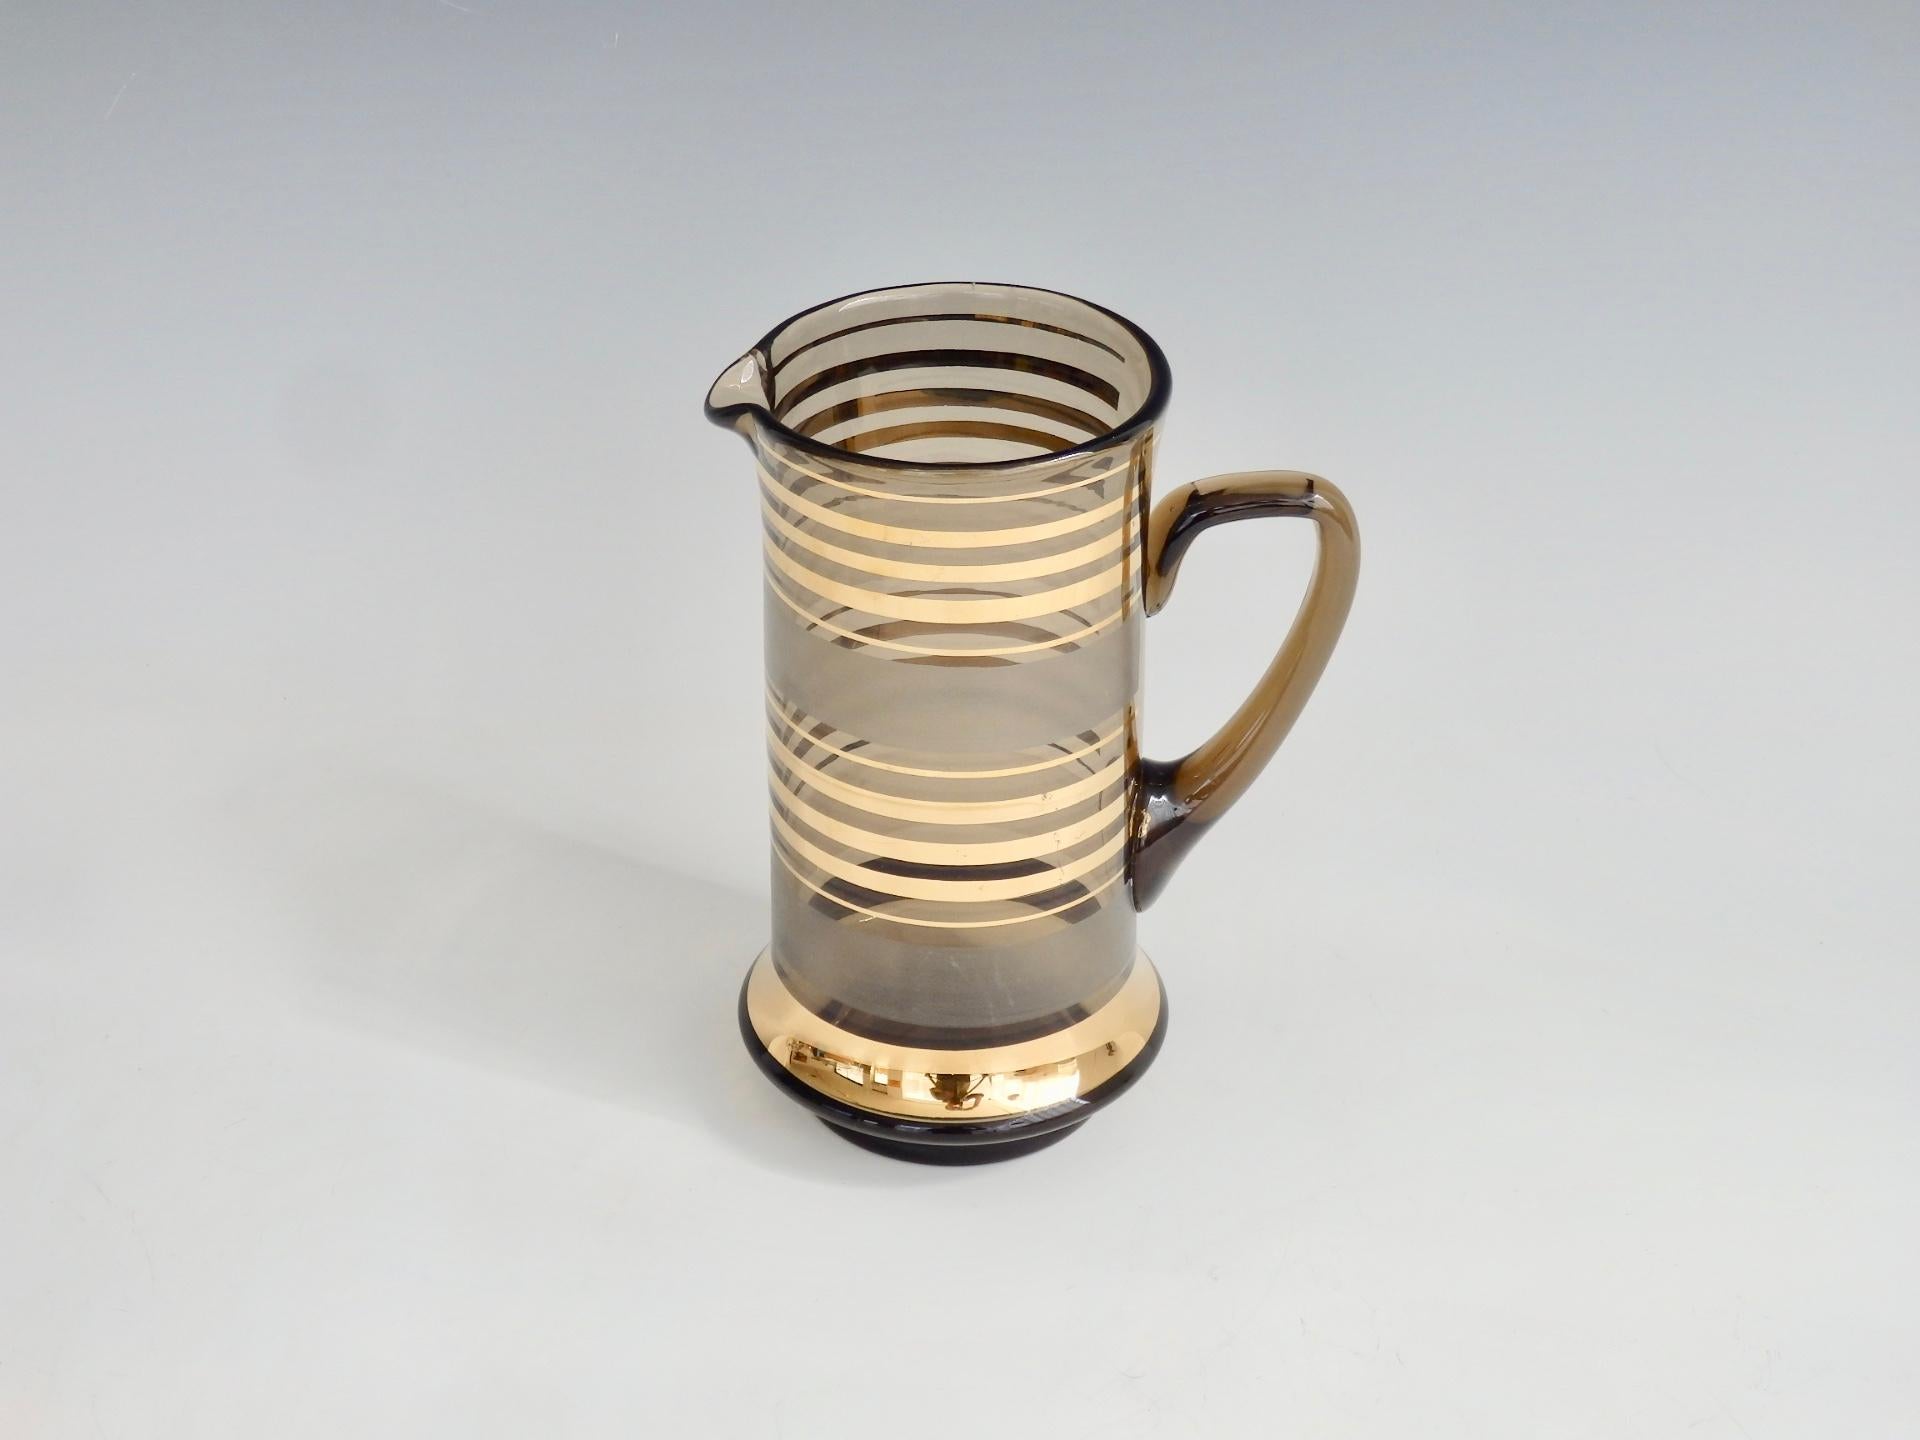 A 1960s Mid-Century Modern gold stripe glass cocktail pitcher. This is a gem of a cocktail pitcher with rich gold cylindrical striping and frosted bands on smoke glass, finished with a polished bottom. A tasteful vintage addition to any bar or